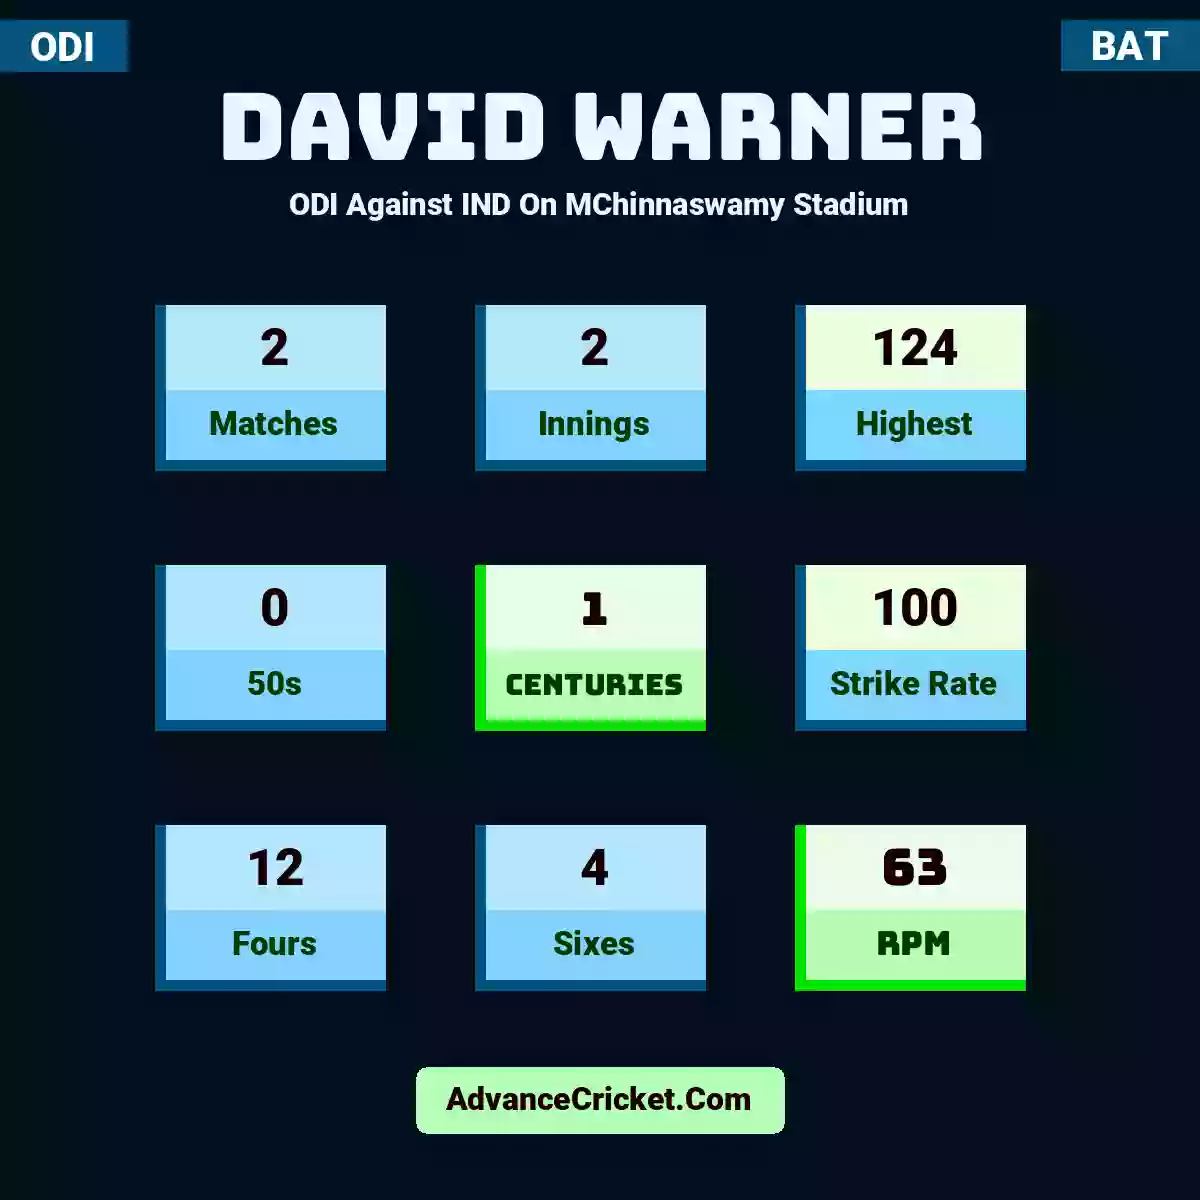 David Warner ODI  Against IND On MChinnaswamy Stadium, David Warner played 2 matches, scored 124 runs as highest, 0 half-centuries, and 1 centuries, with a strike rate of 100. D.Warner hit 12 fours and 4 sixes, with an RPM of 63.